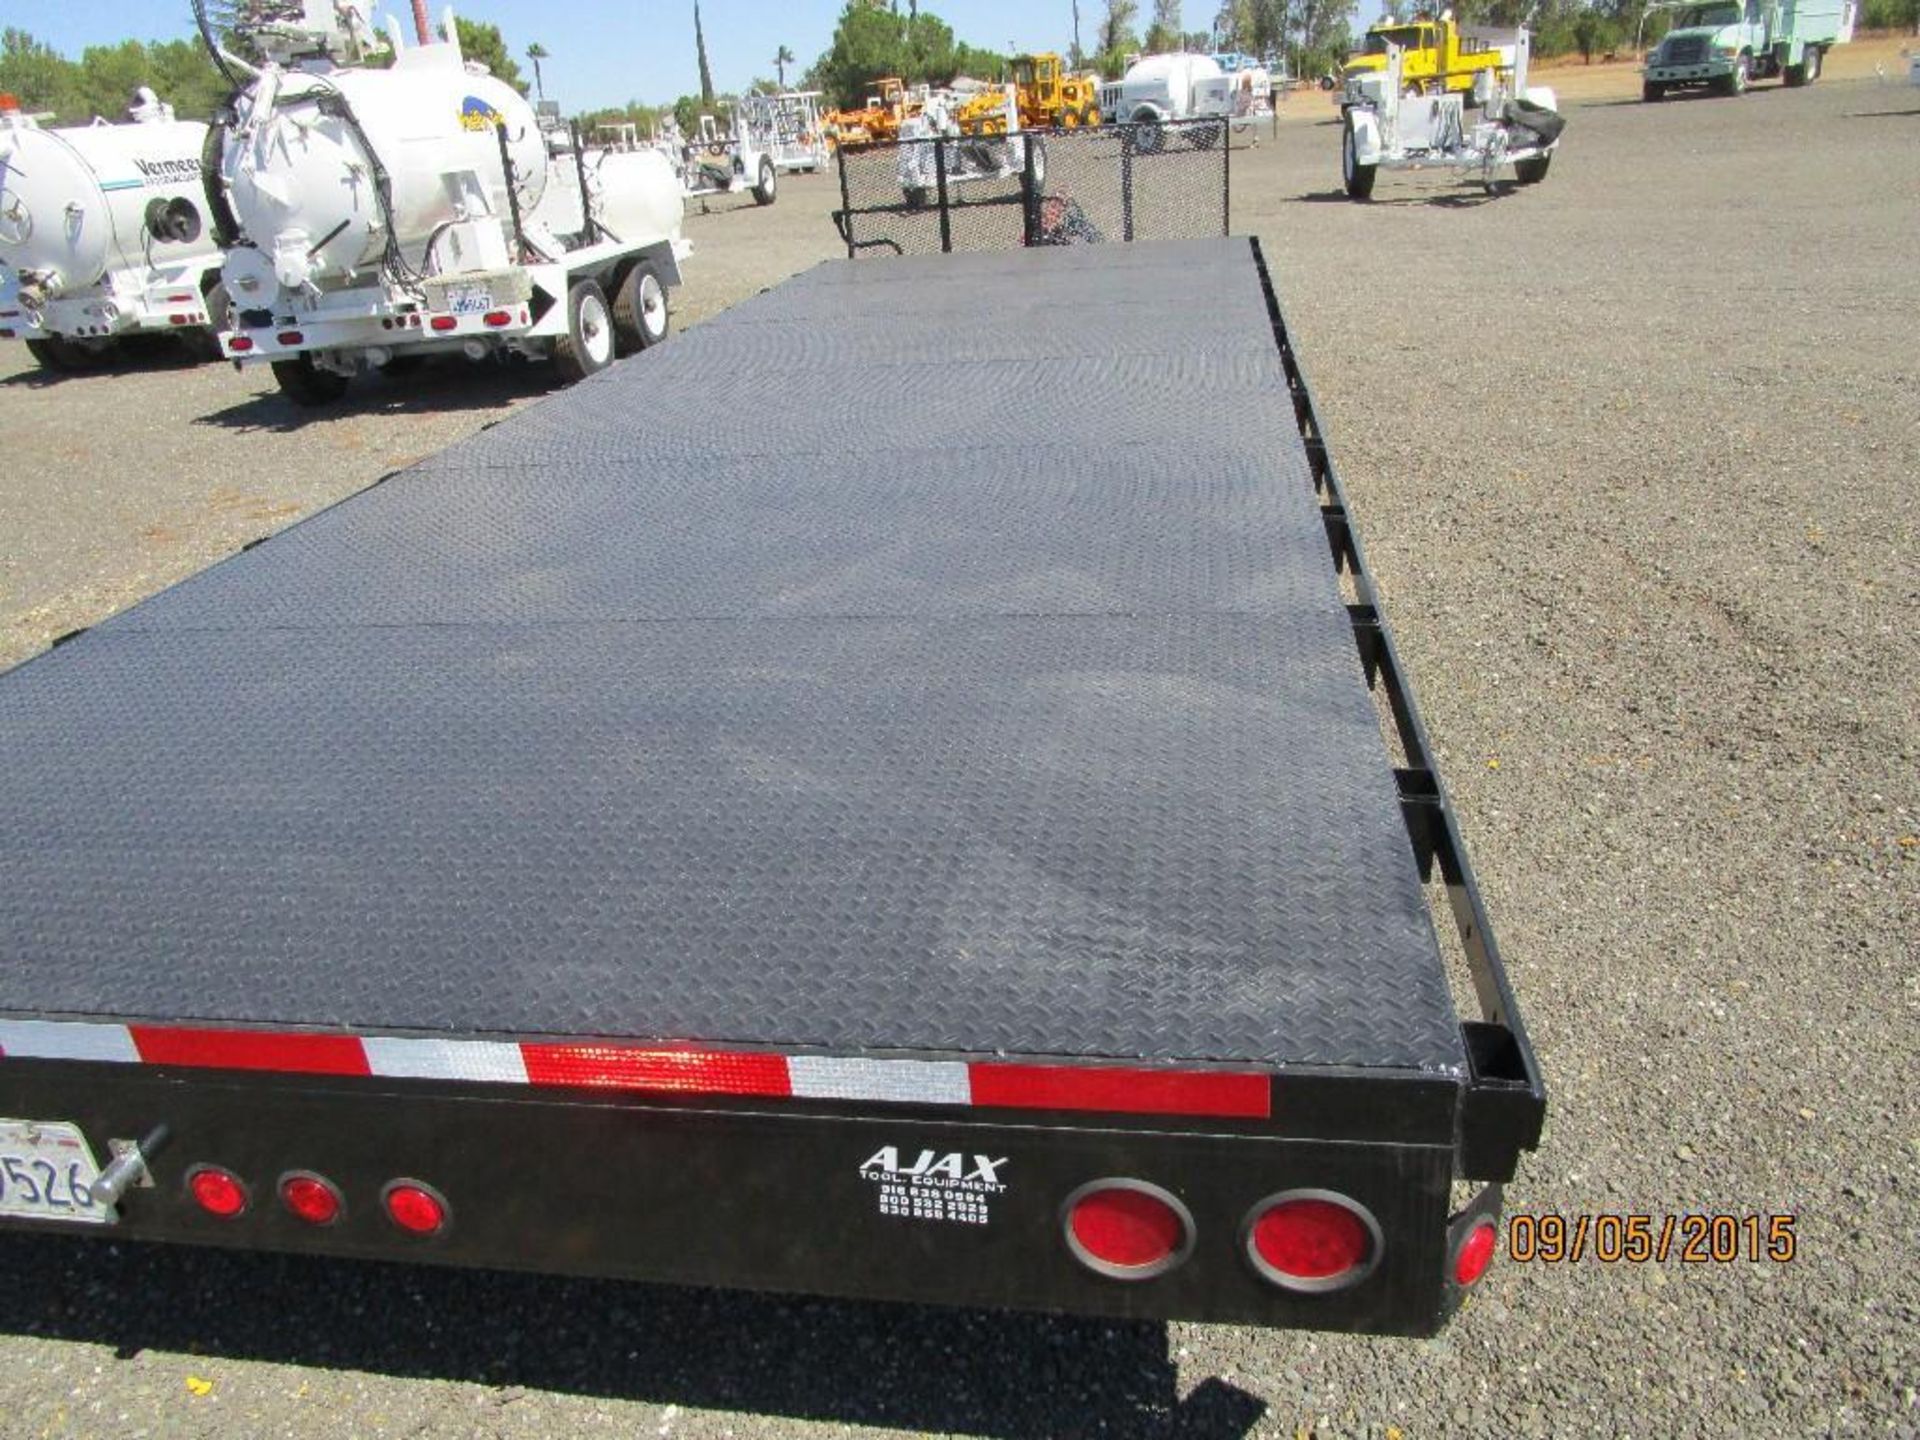 24'x102" Flatbed Trailer  VIN# 1B9H24201B1031523  Plate# 4FD9526  GVWR - 24,000 lbs  Pintle Hitch - Image 8 of 8